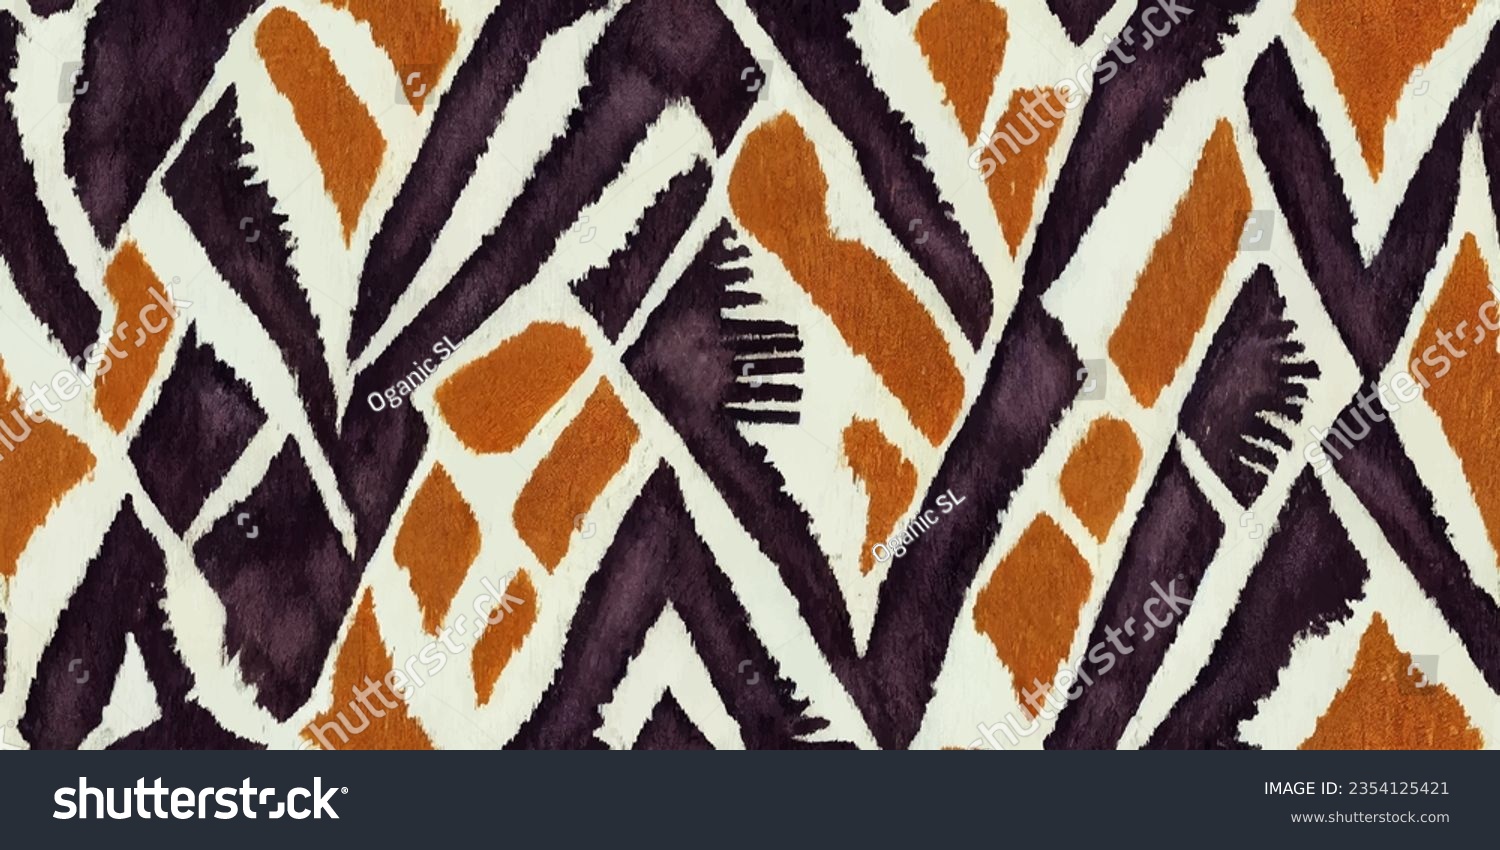 SVG of Motif ethnic handmade beautiful Ikat art.Ikat ethnic tribal, boho colors  seamless wallpaper. Ethnic Ikat abstract background art.Illustration for greeting cards, printing and other design project. svg